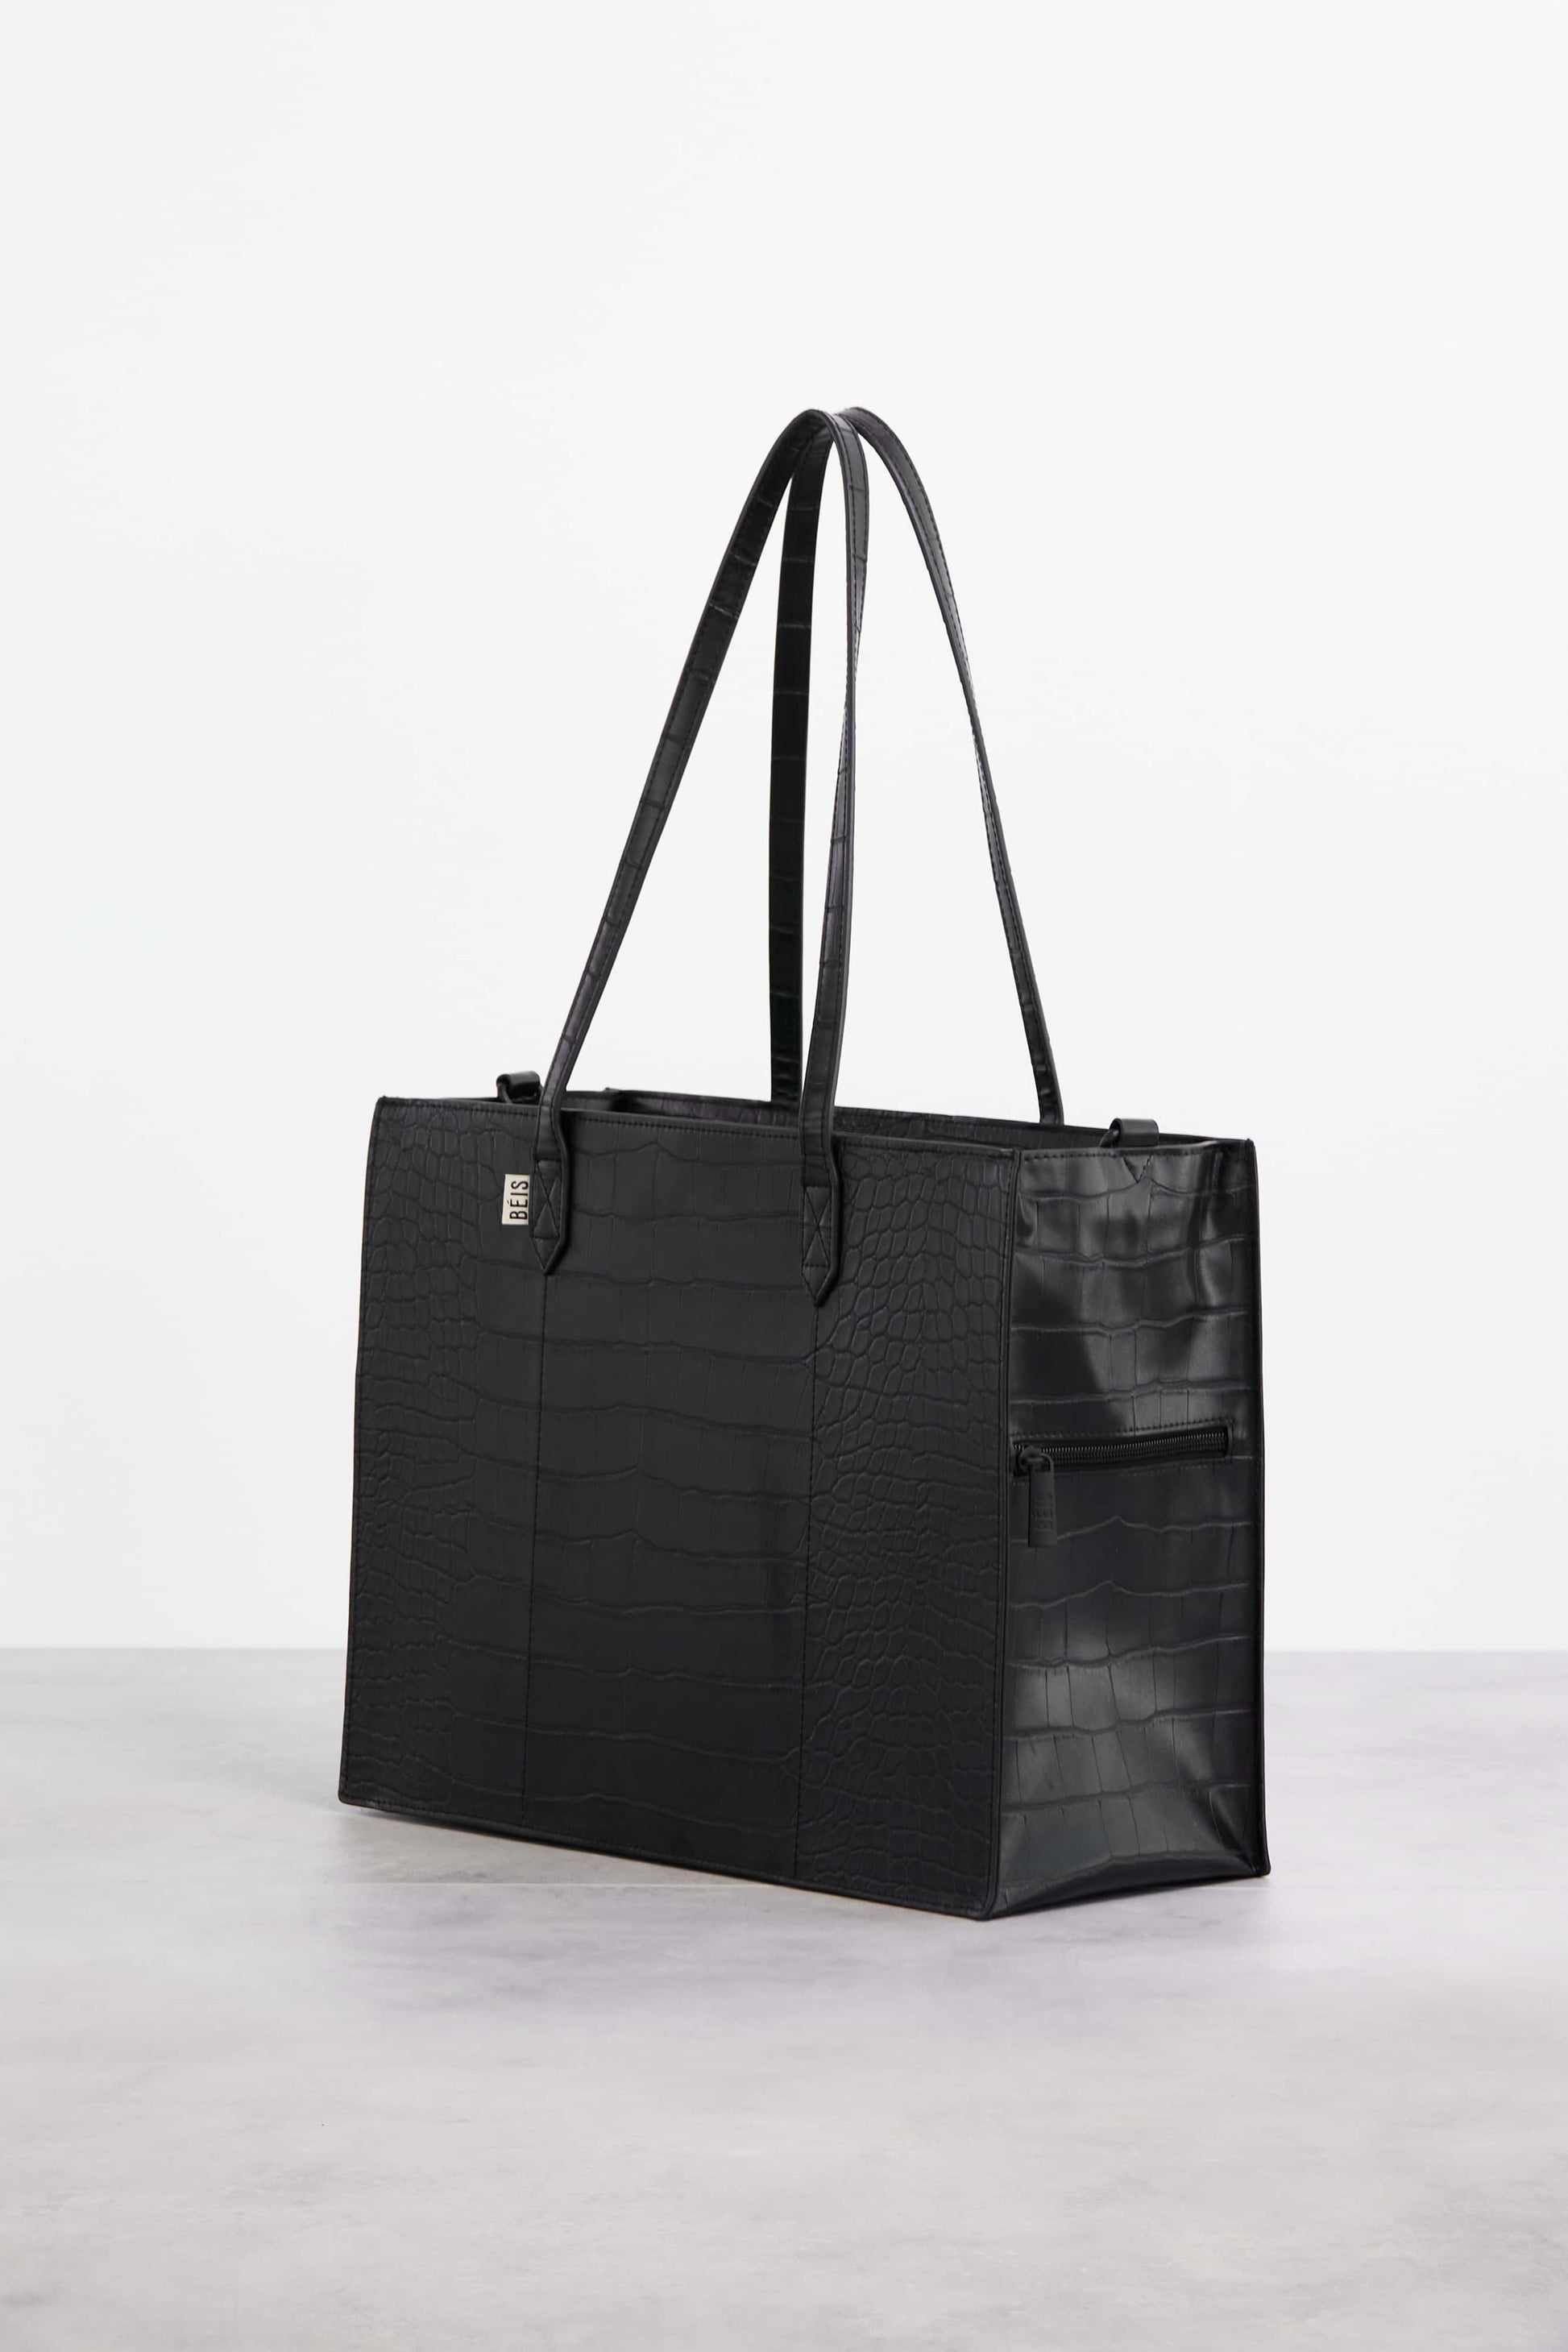 Mini Work Tote in Black Croc Front and Side Angle